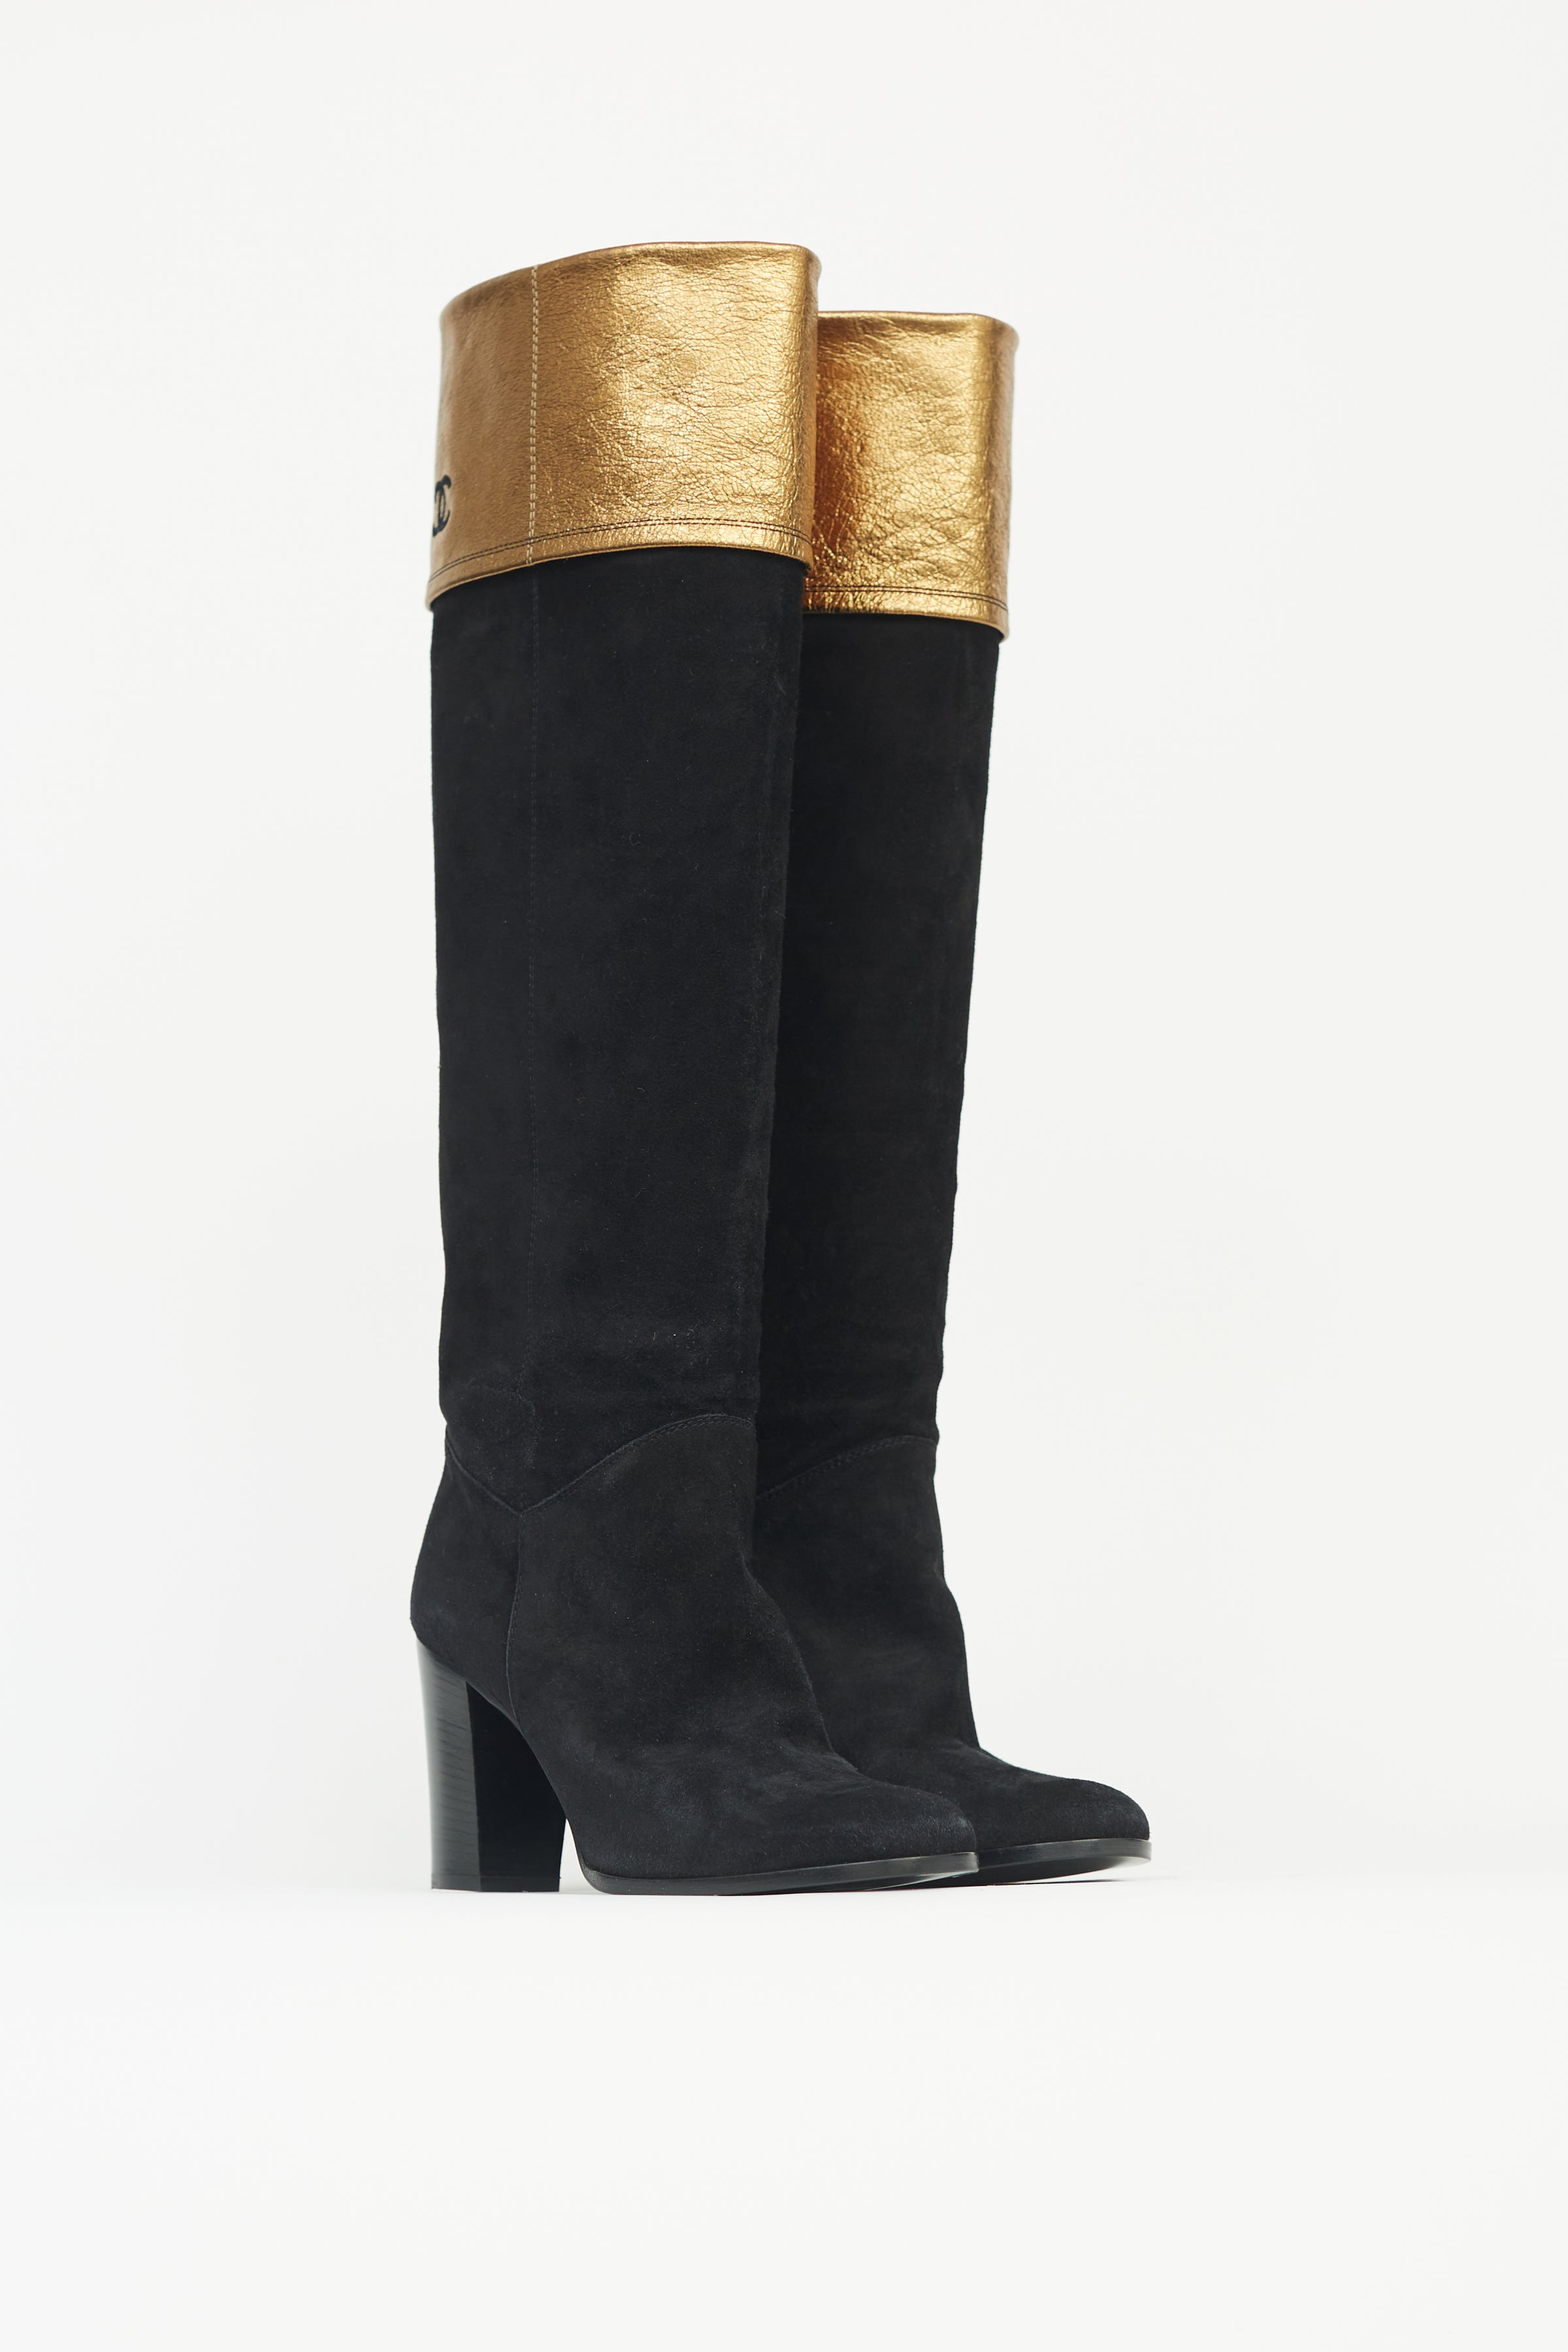 Chanel by Karl Lagerfeld ThighHigh CC Boots